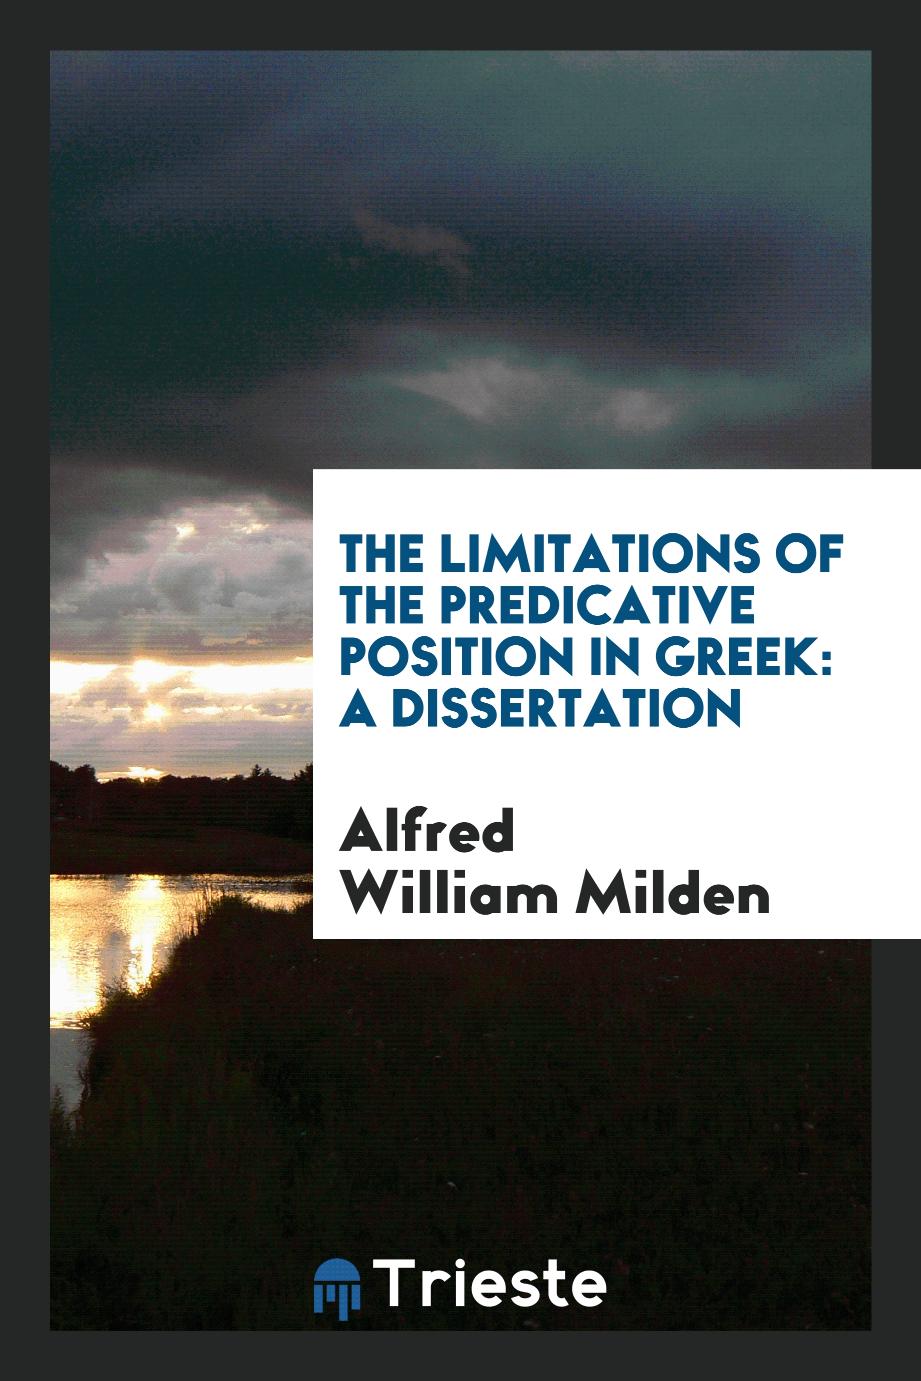 The limitations of the predicative position in Greek: a dissertation